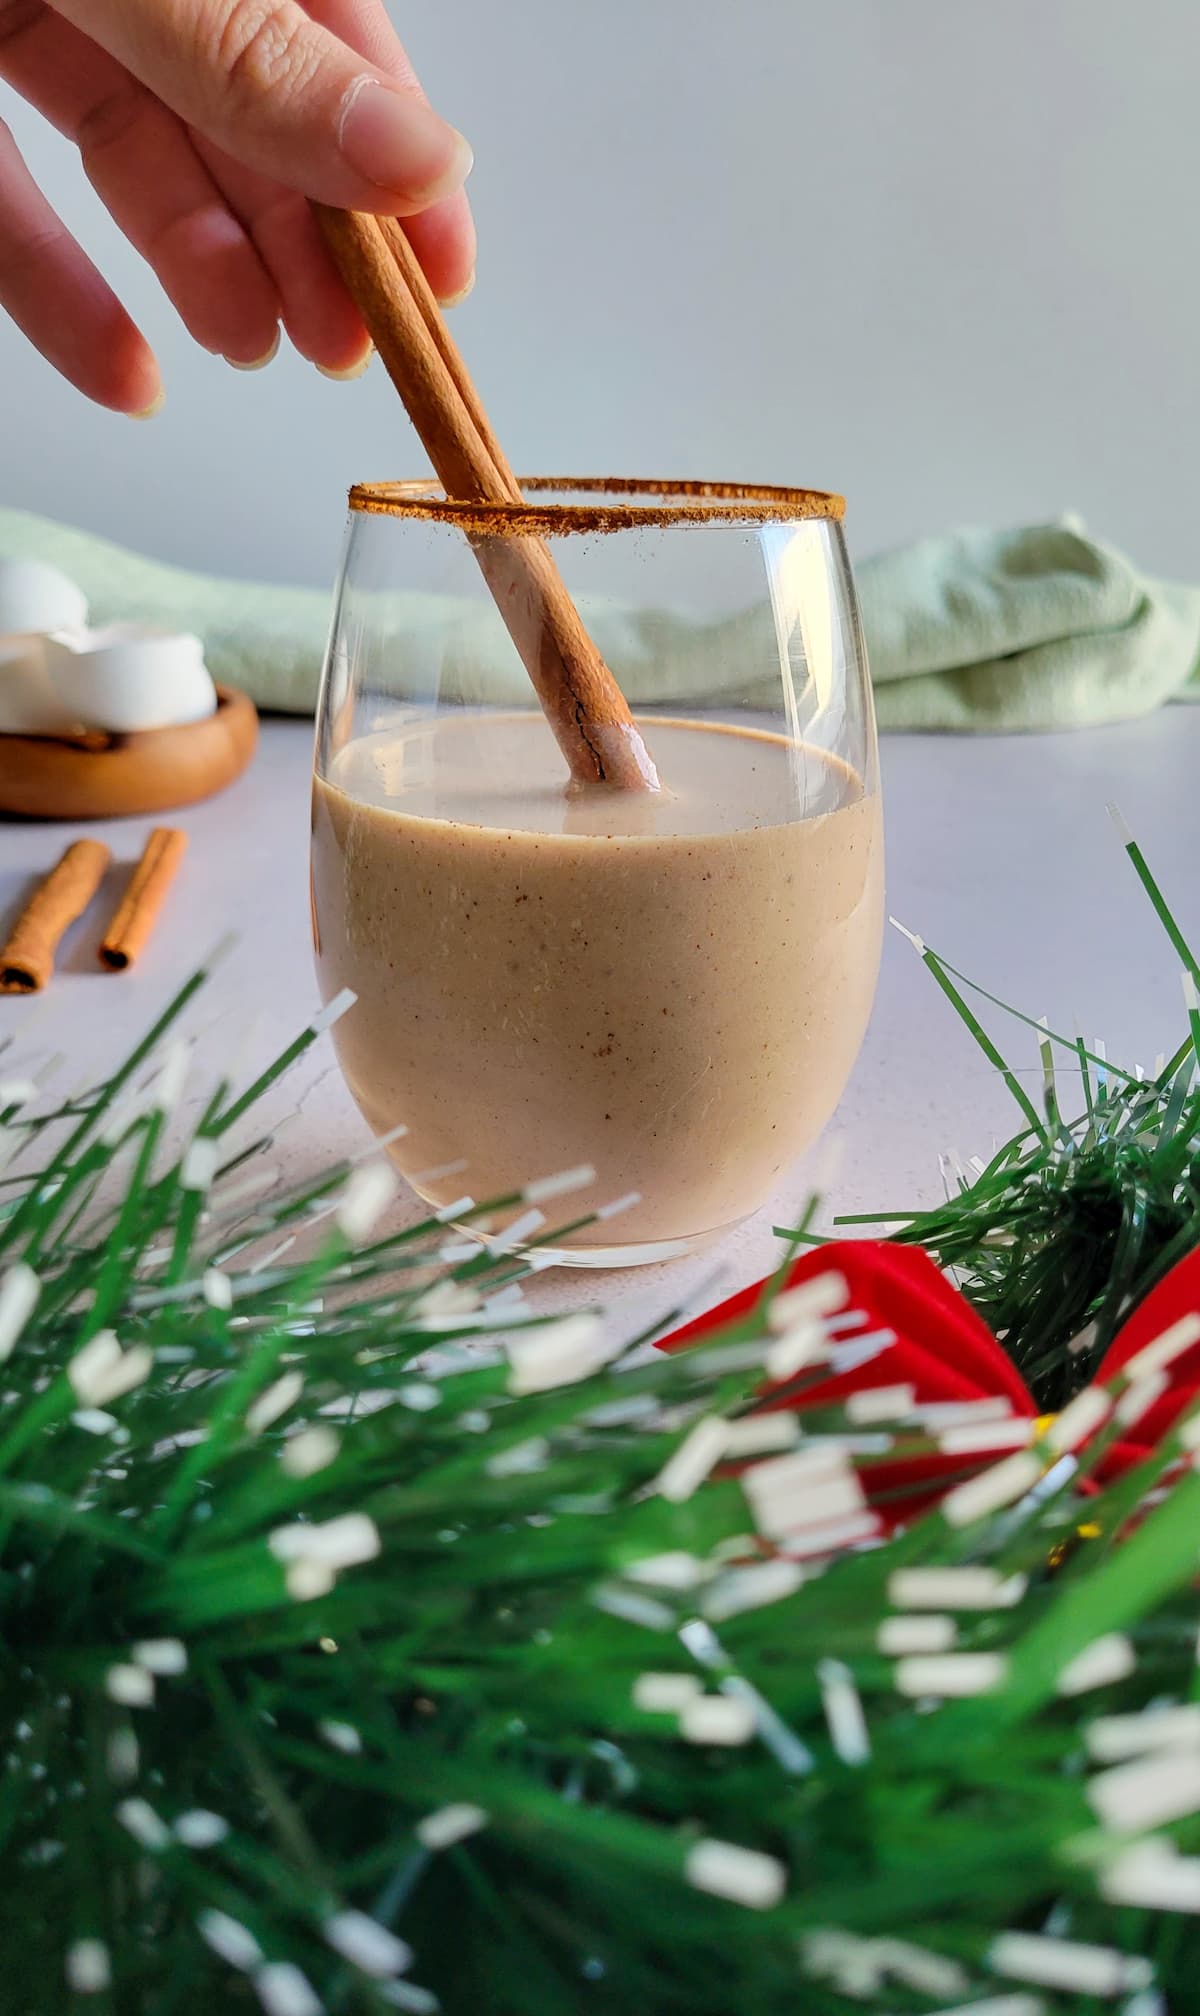 hand touching a cinnamon stick in a glass of eggnog